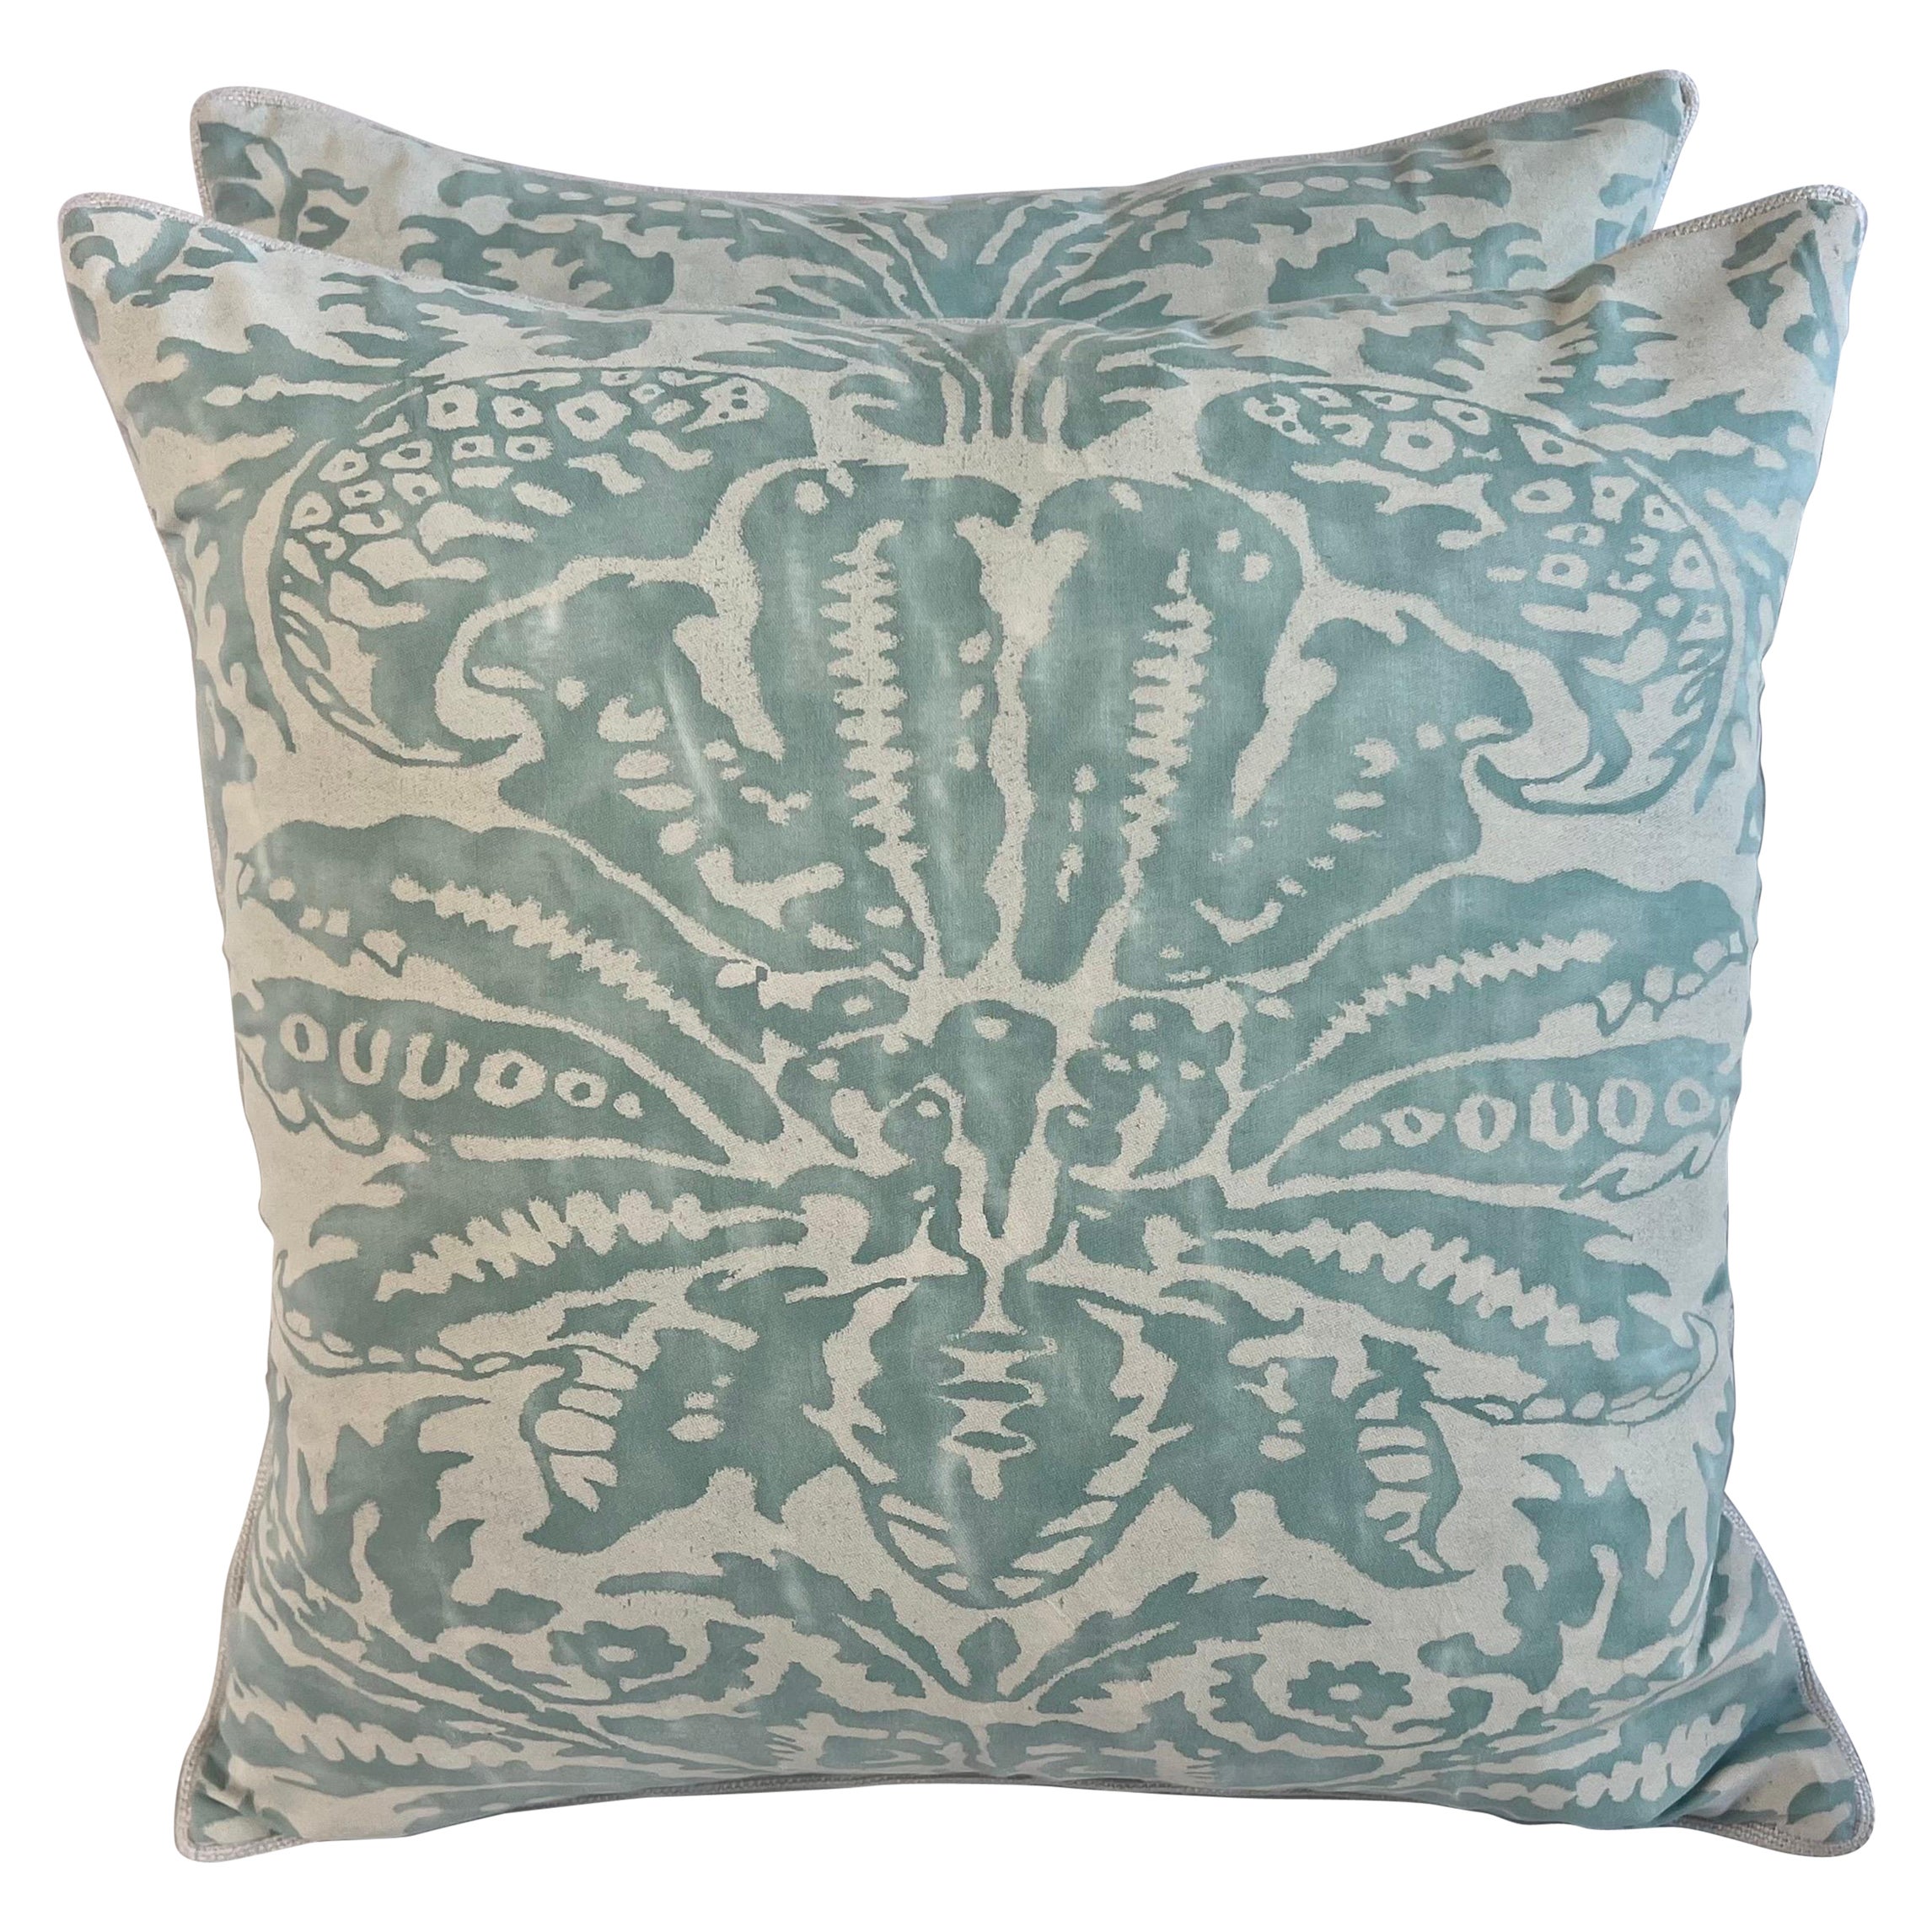 Pair of Aqua & White Colored Fortuny Pillows